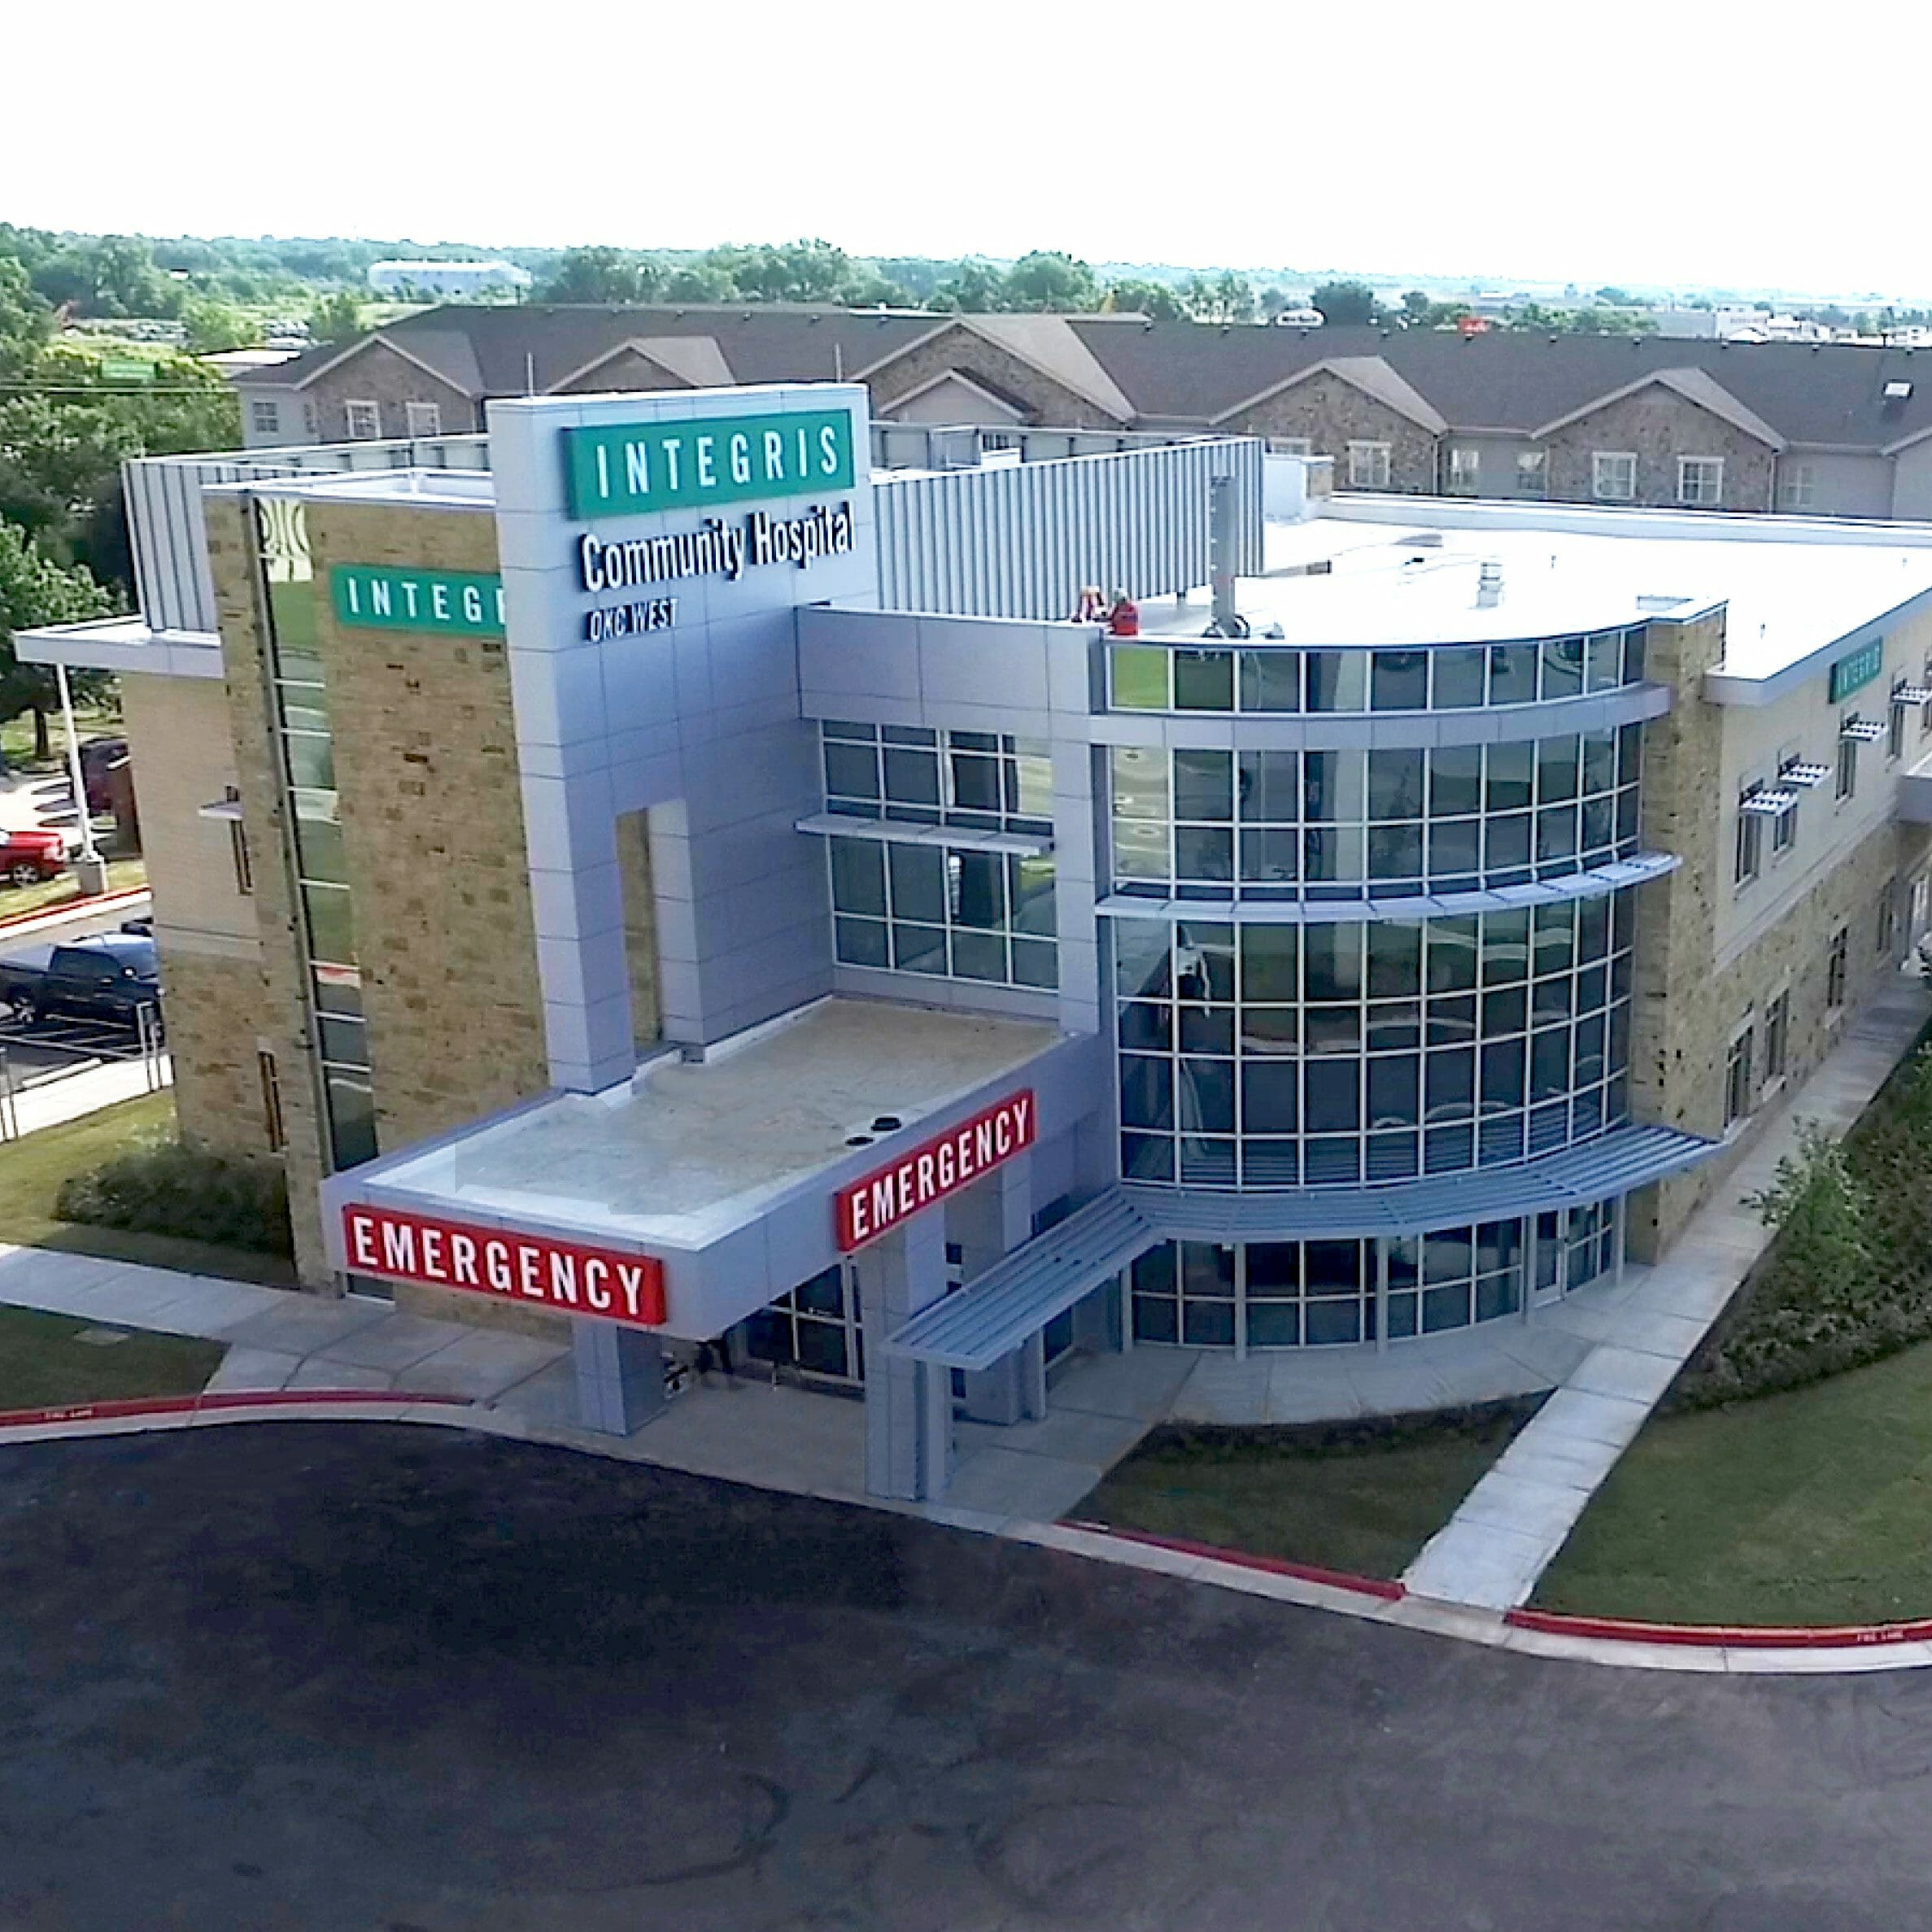 Aerial view of Integris OKC West community hospital, showing the red emergency sign with white letters and the teal integris sign on top.